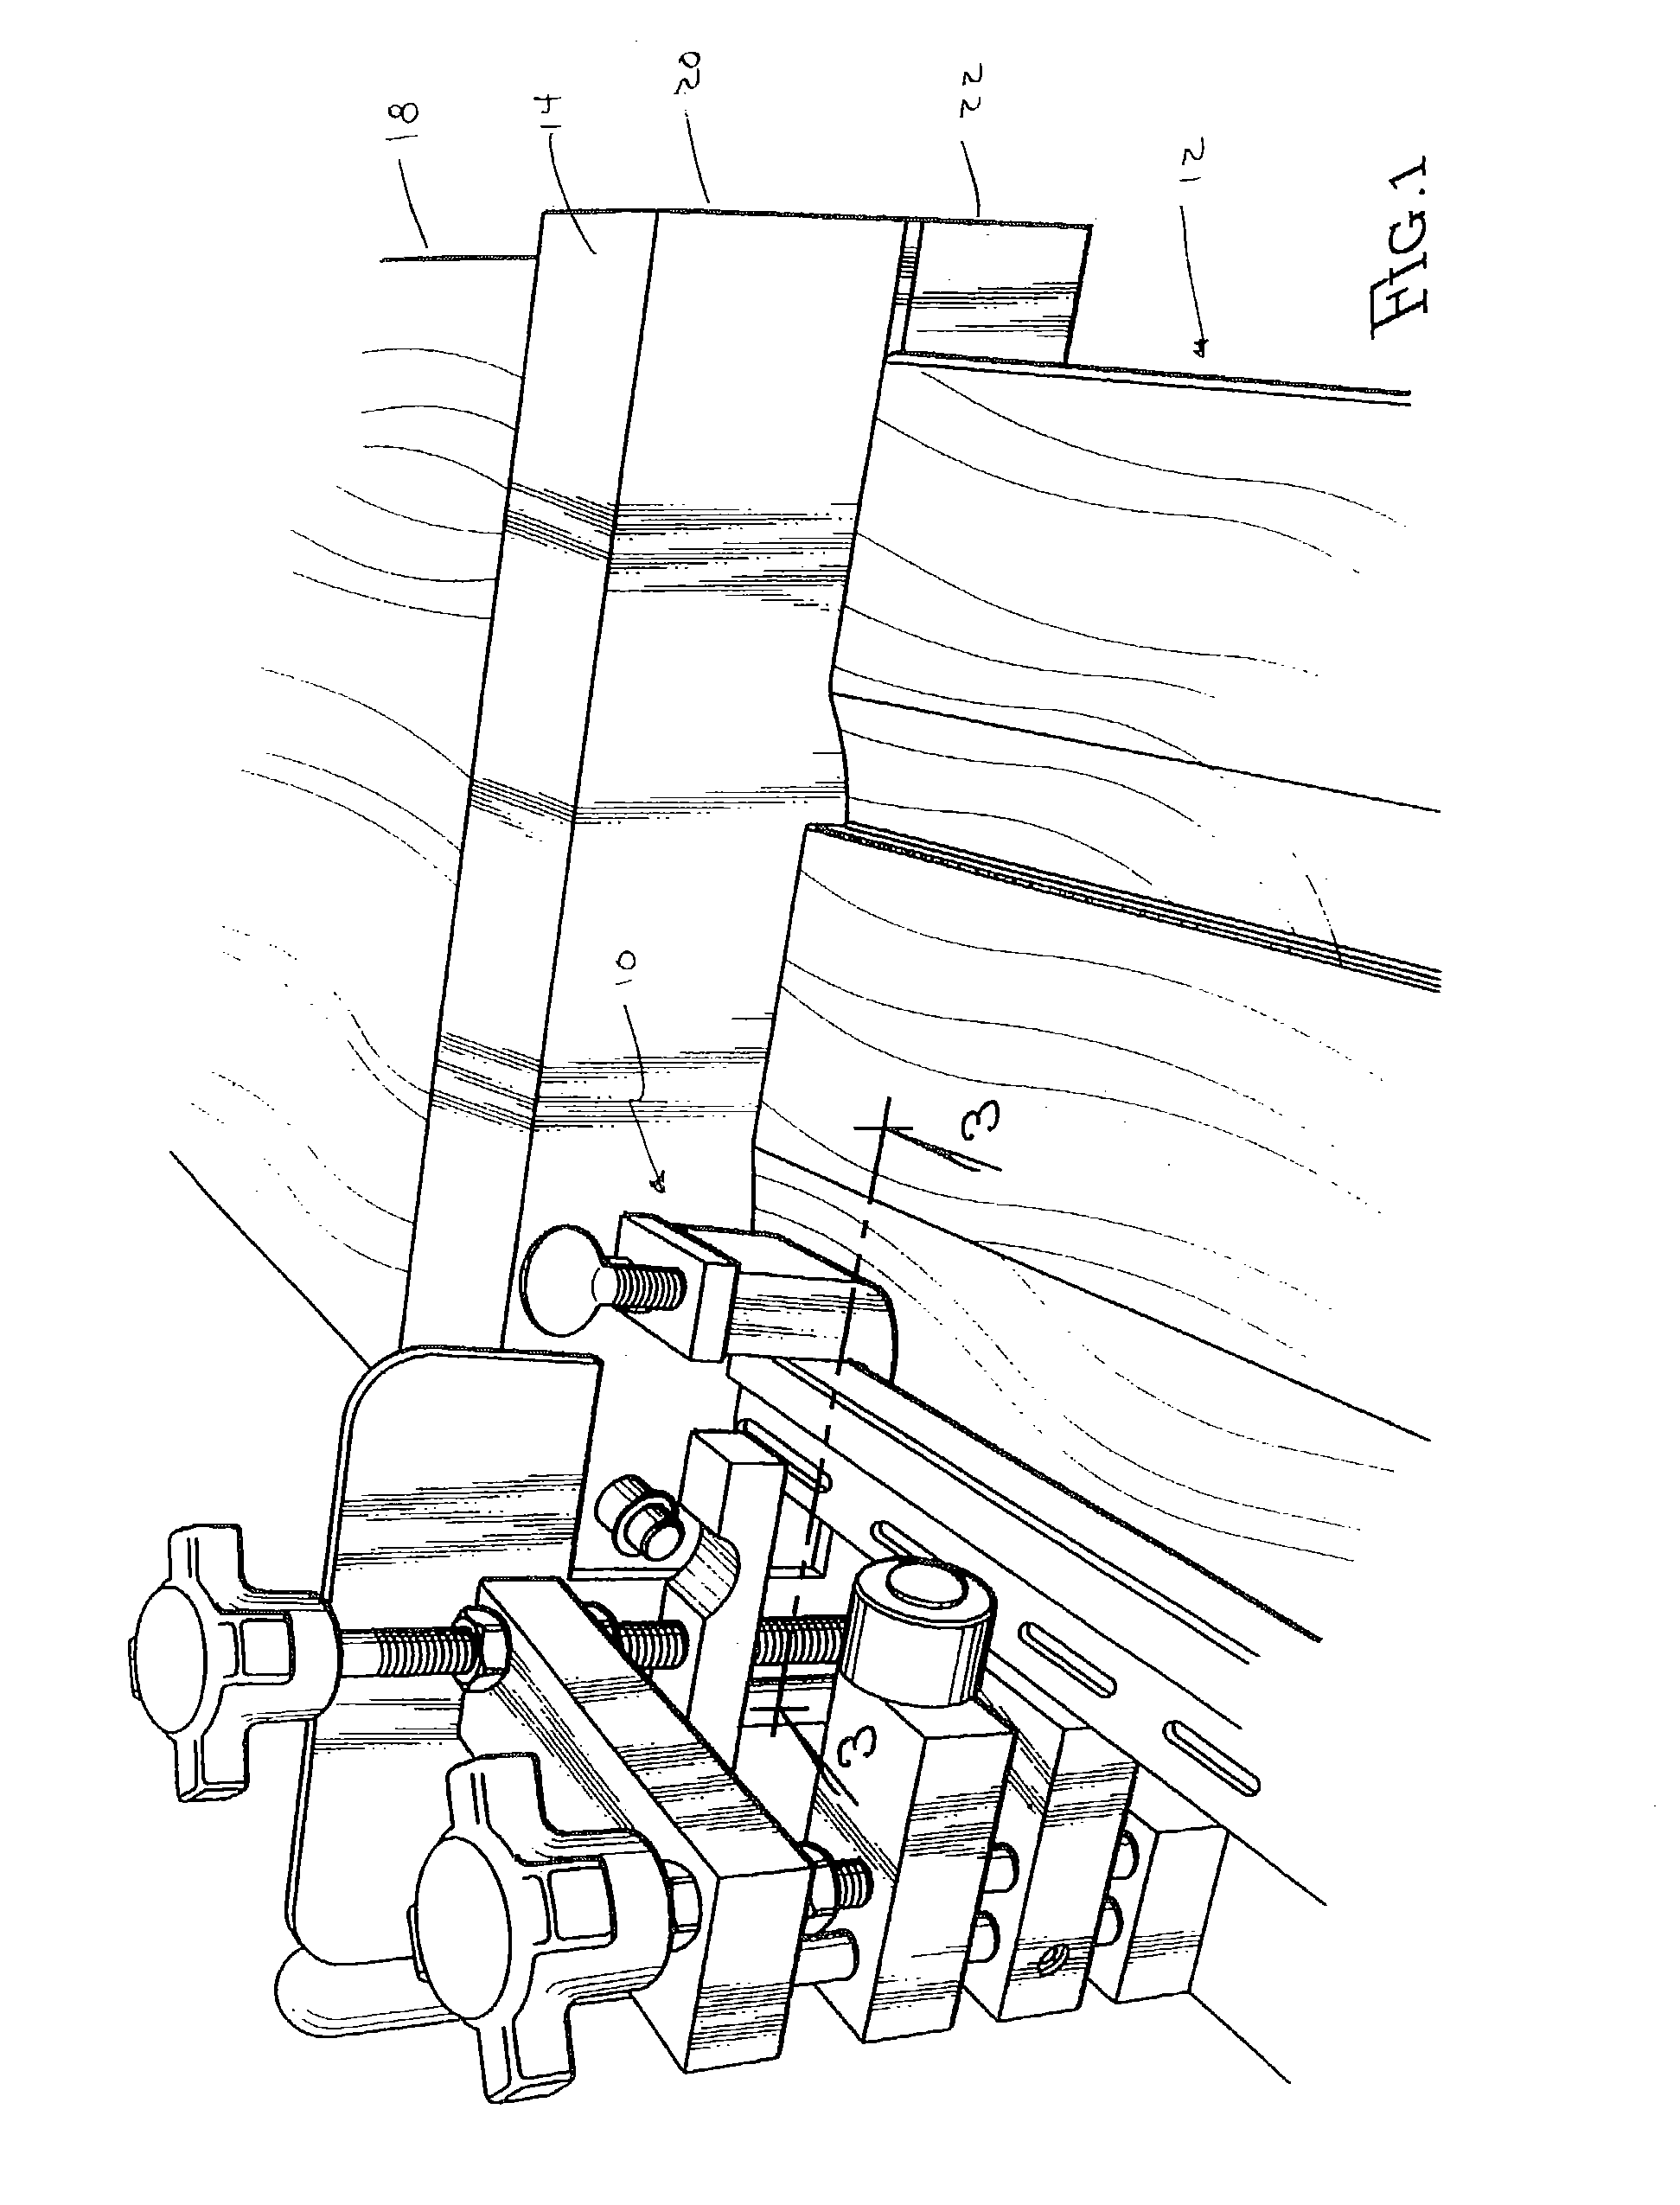 Apparatus and method for adjusting component features